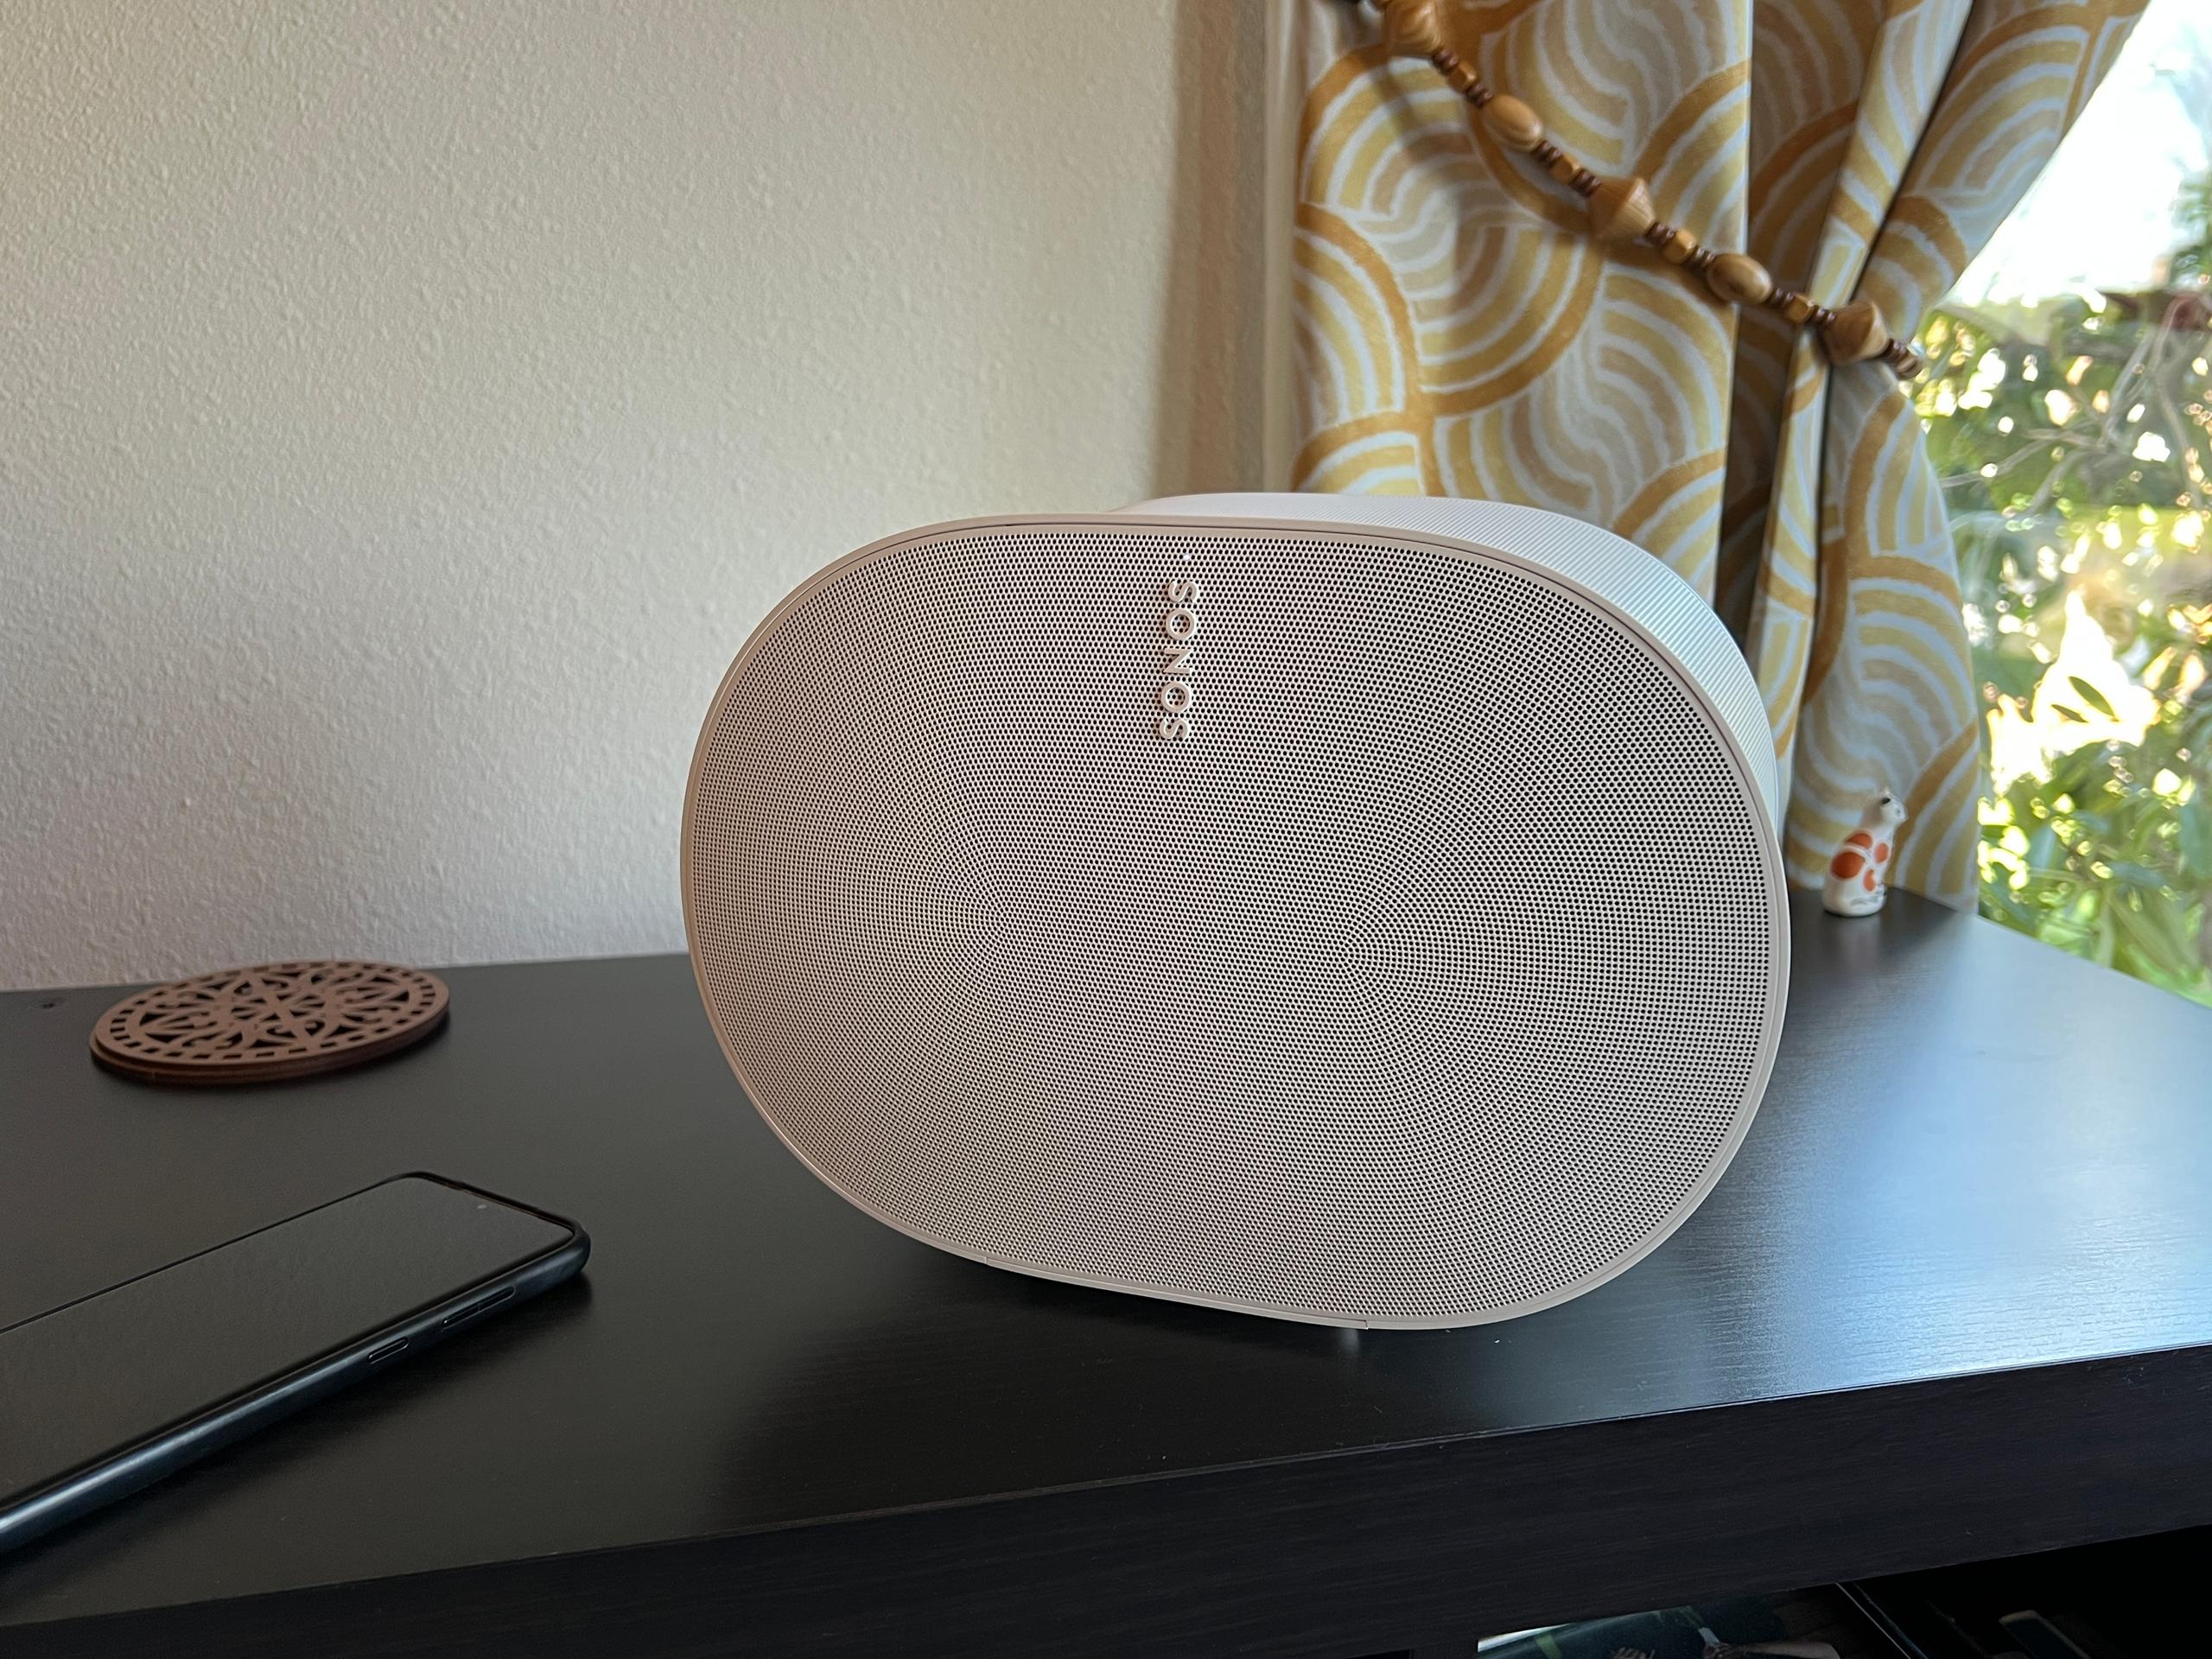 The Sonos Era 300 sits at an angle on a black record stand next to a phone.